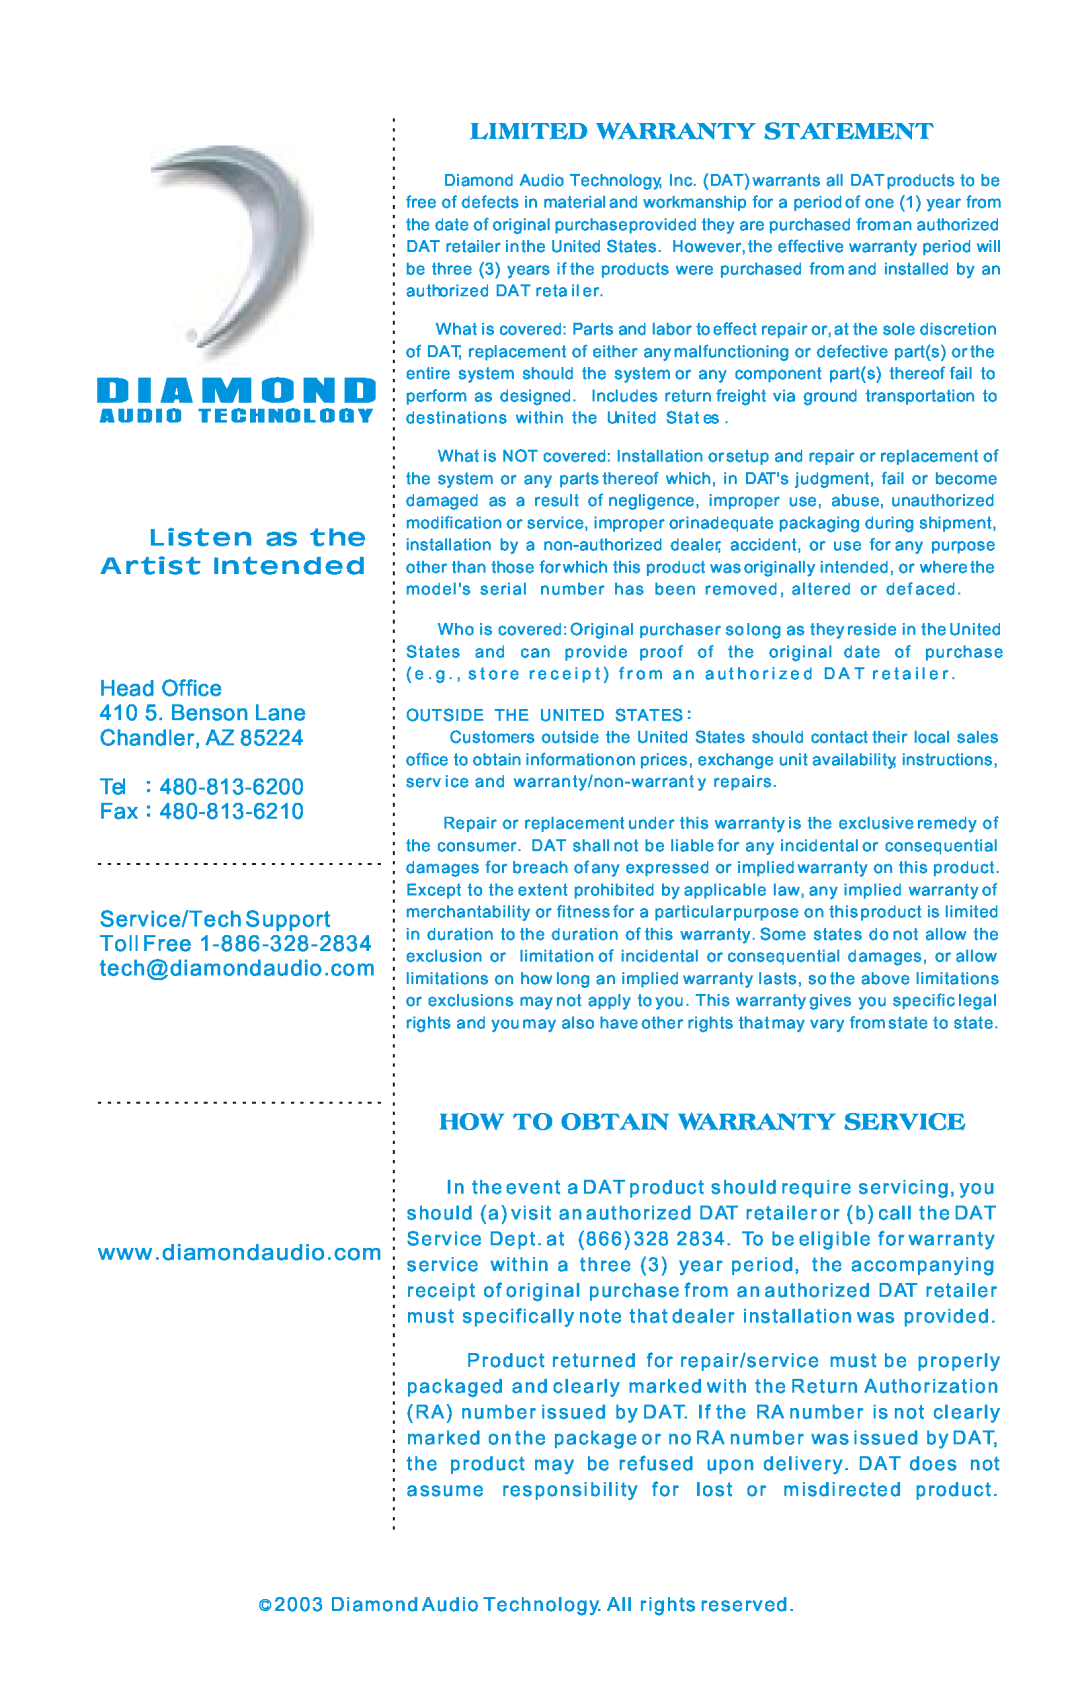 Diamond Audio Technology D3 Series specifications D I A M O N D, Listen as the Artist Intended, Limited Warranty Statement 